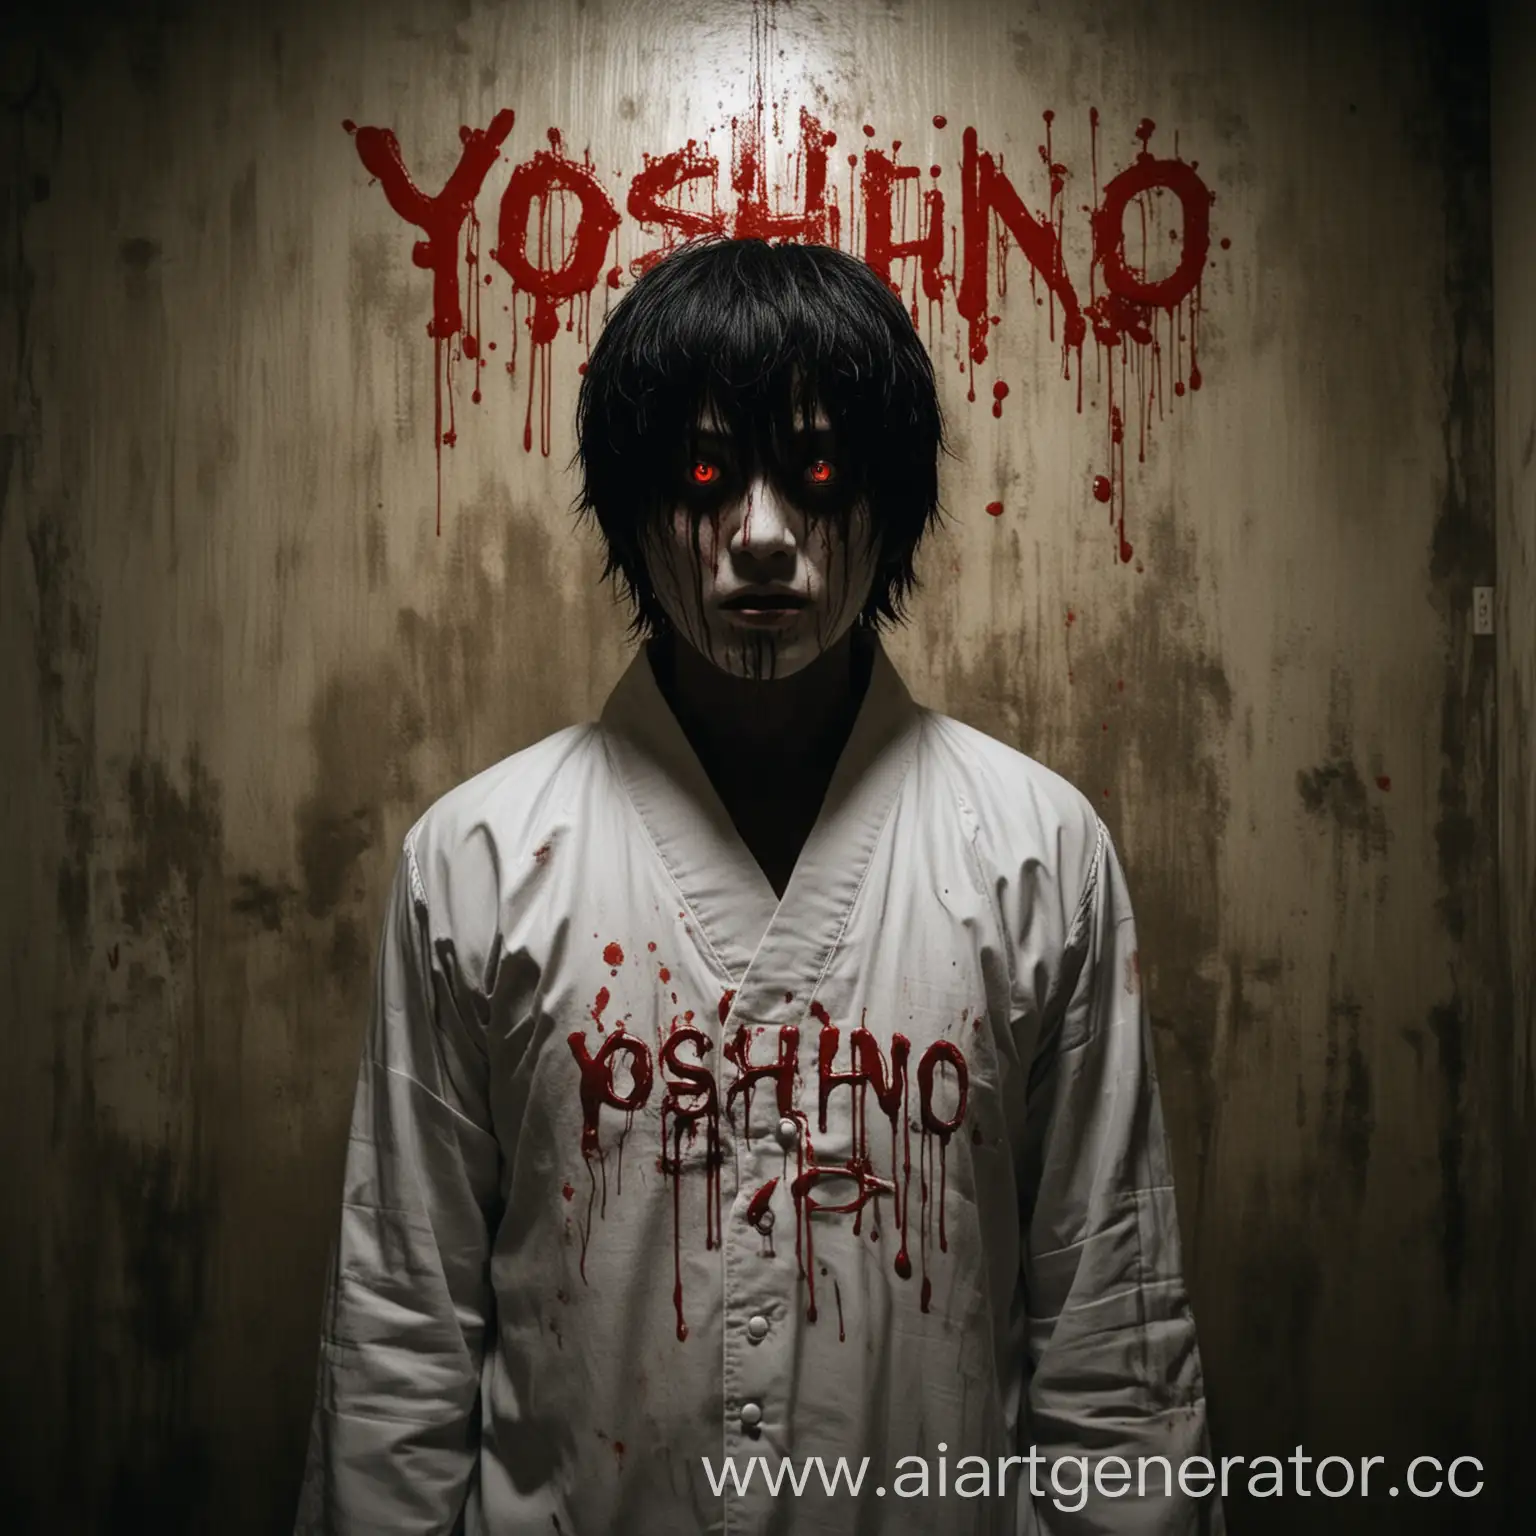 in front of you in a scary room with blood sits a dark man without a face with black hair with eyes on the walls, with the inscription yoshino